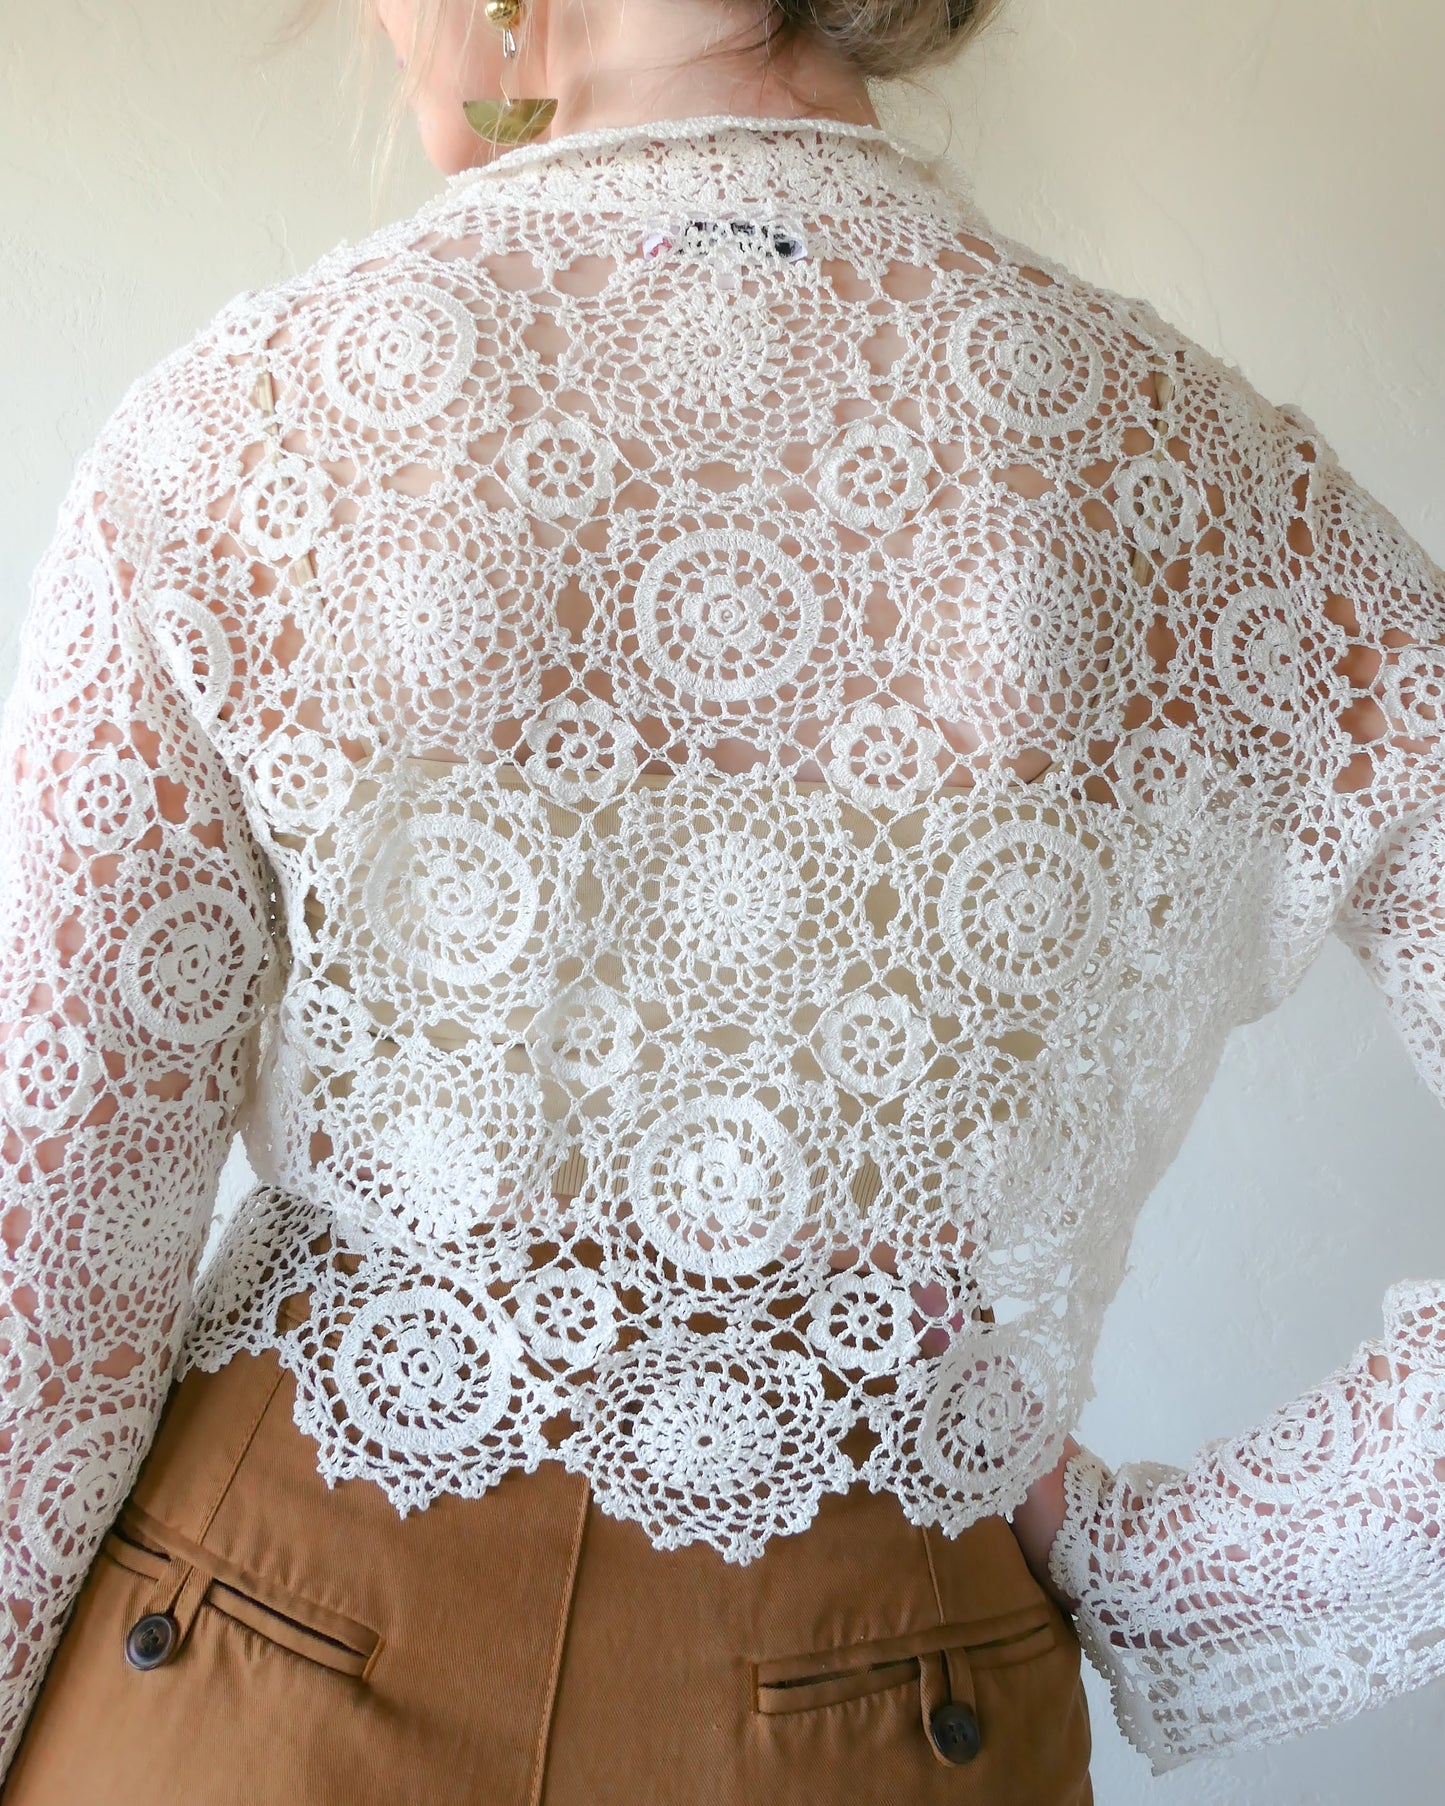 Back view of Lim's Vintage crochet cropped cardigan in ivory. A versatile and boho chic hand crocheted cropped cardigan sweater in Ivory with a unique, repeating kaleidoscope-like floral pattern throughout. Dress it down with a pair of jeans and sandals, or dress it up with neutral colored wide leg pants, heels, and a pair of vintage dangly earrings.  Size: Fits Small to Medium